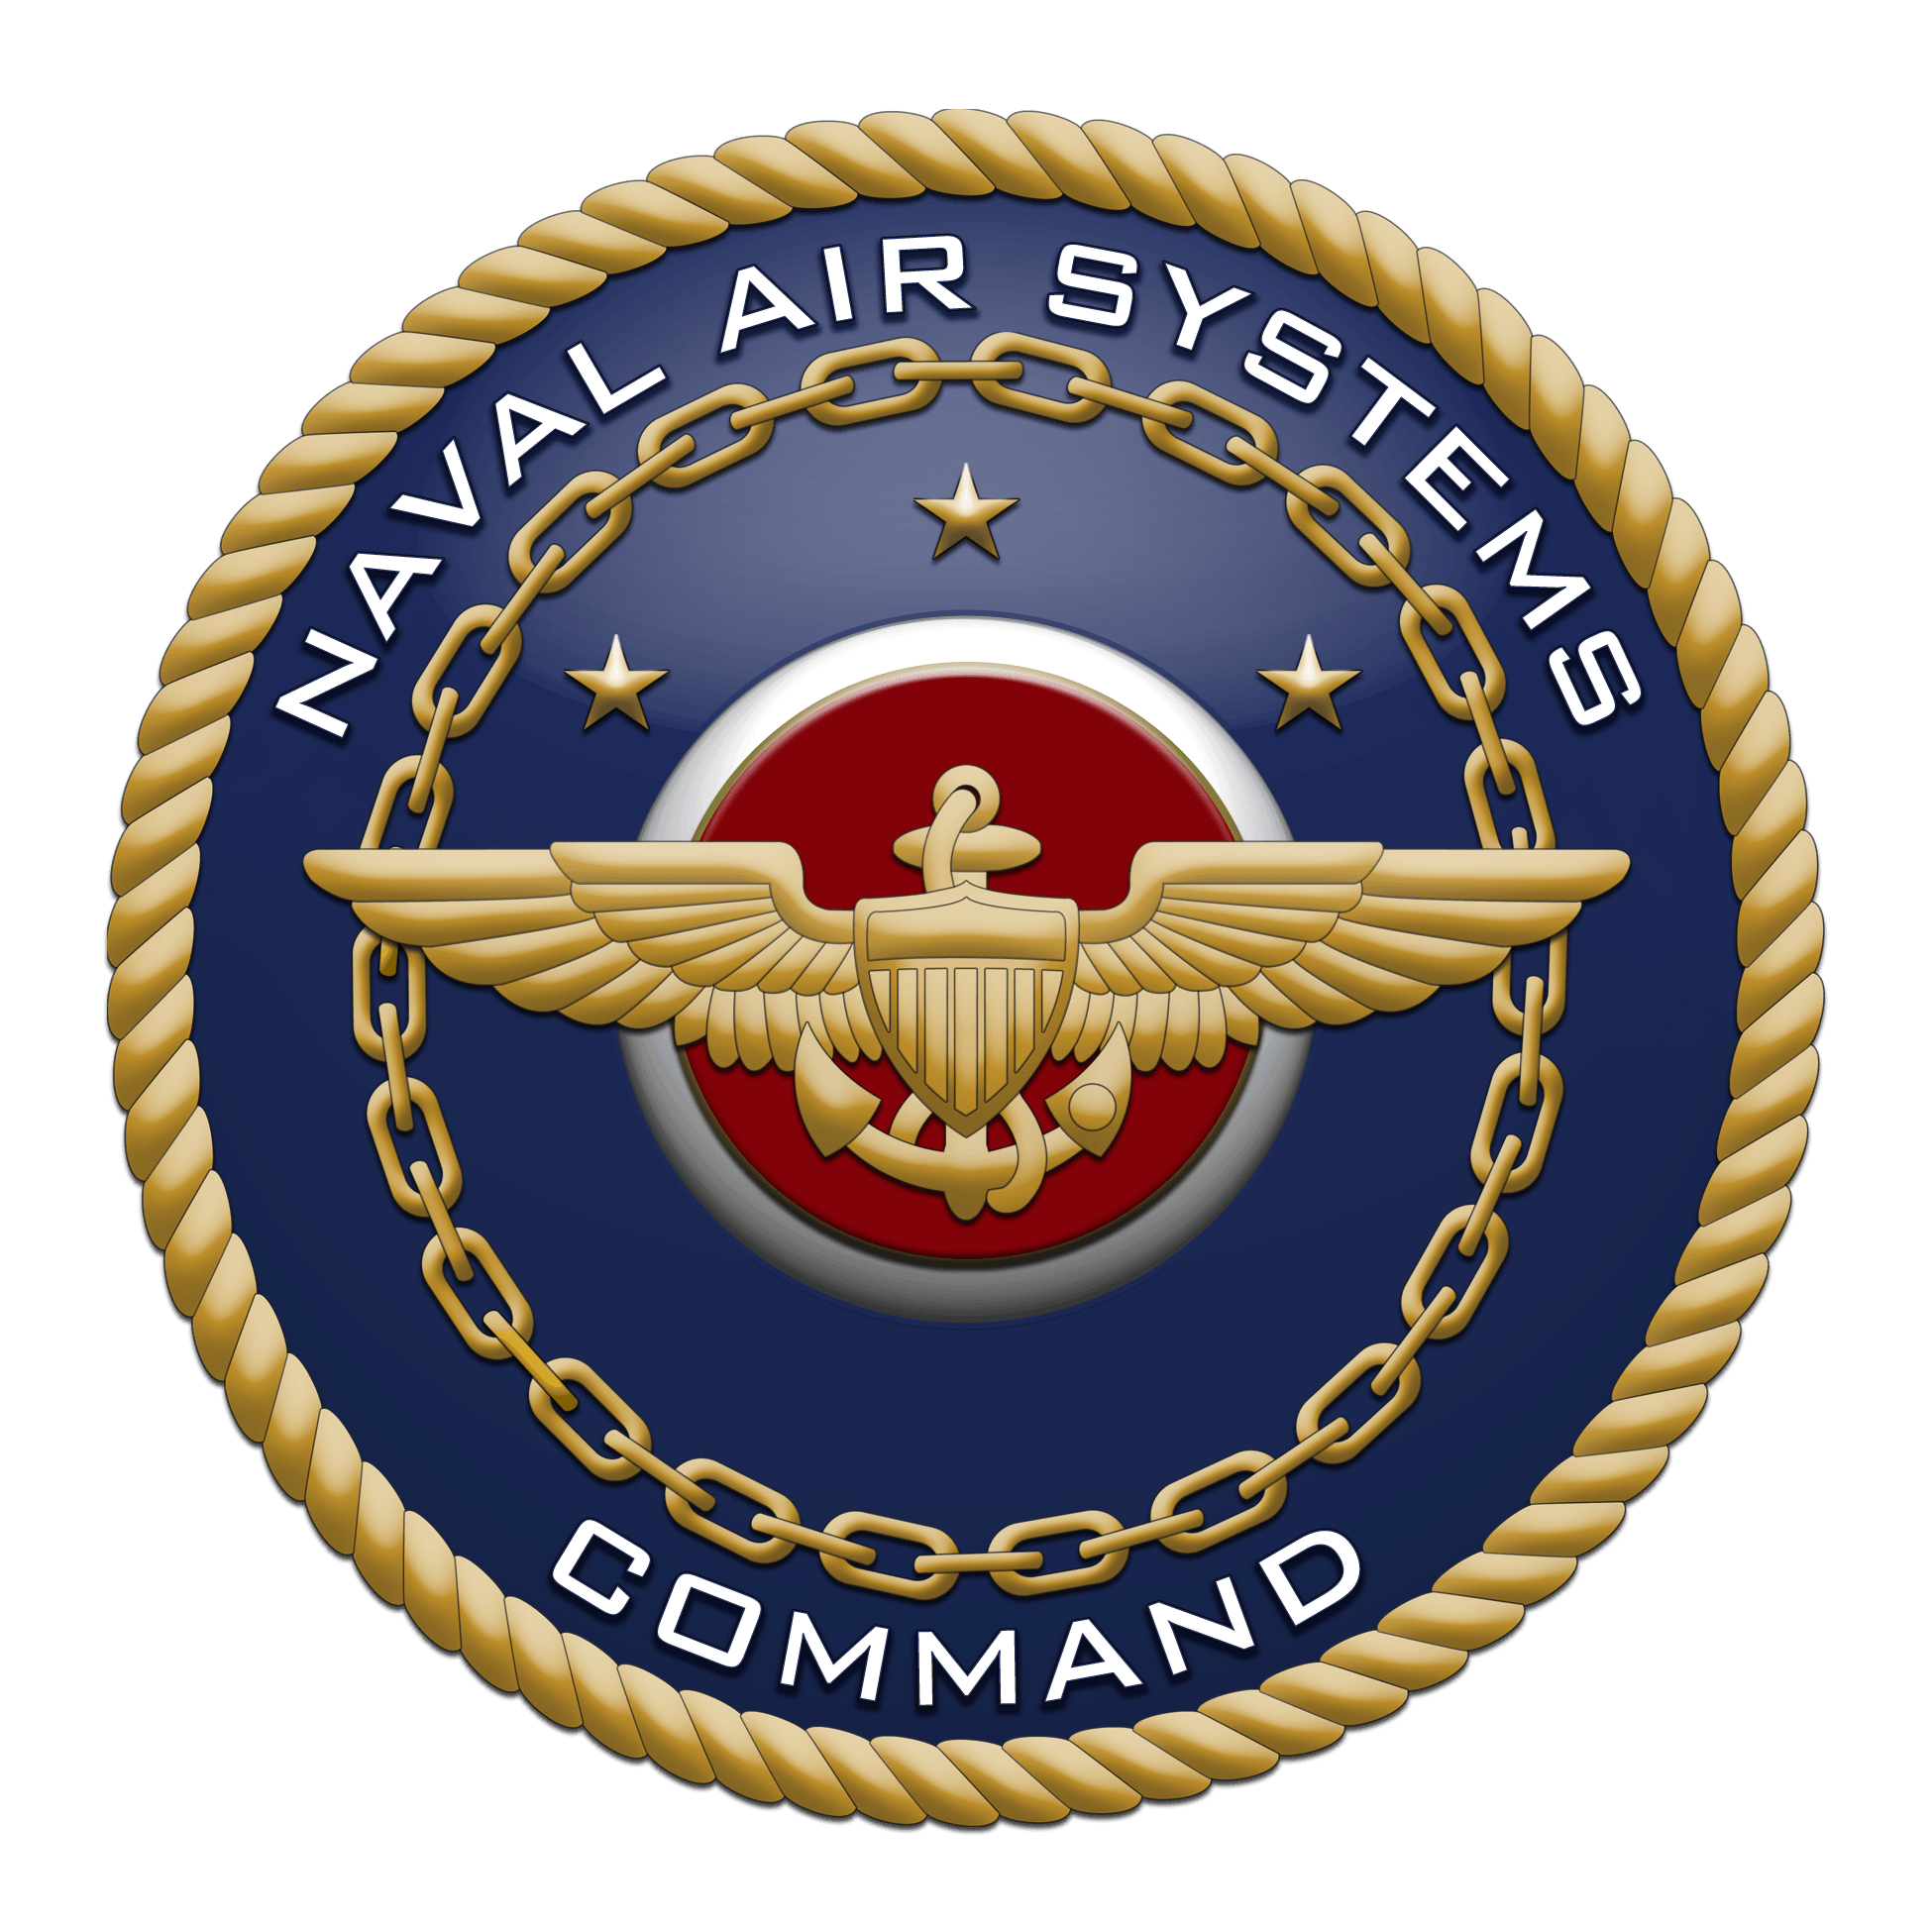 Naval Logo - DSPlogic Awarded Naval Air Systems Command Contract - DSPlogic